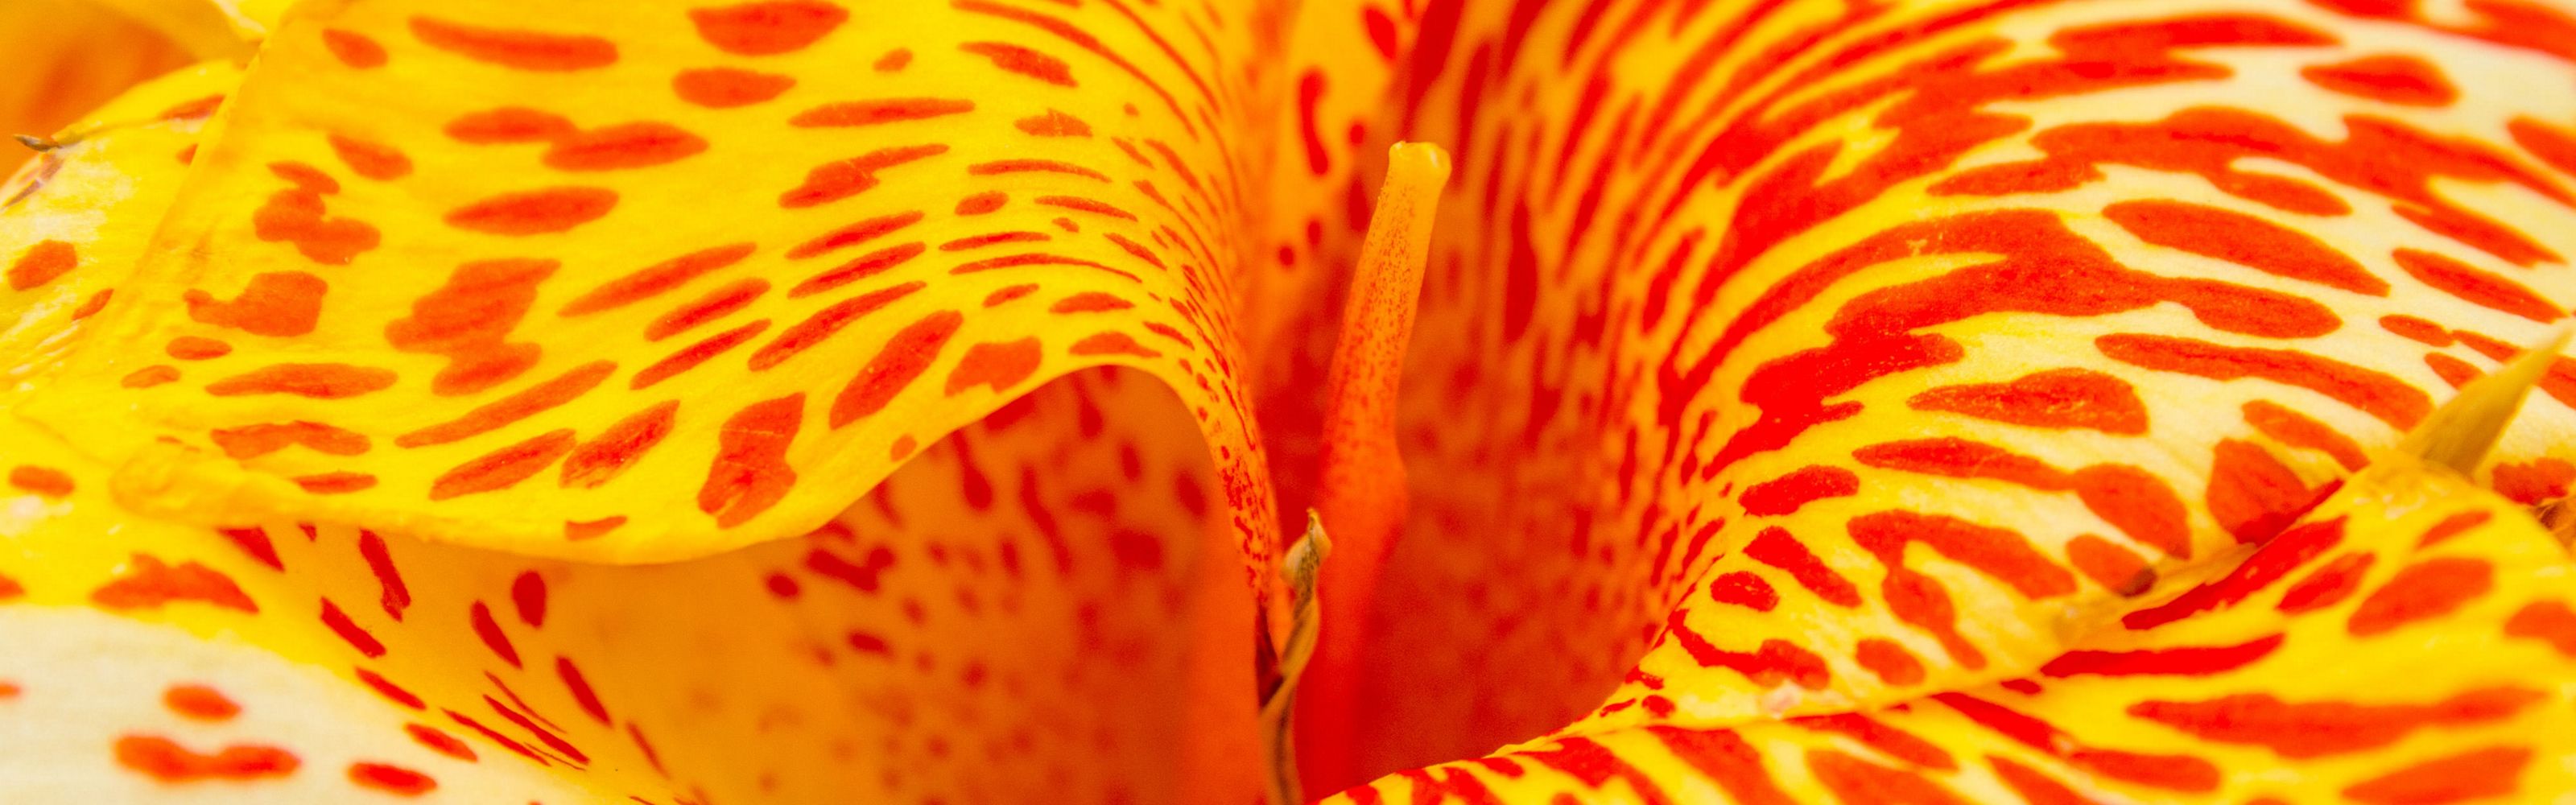 Close up of a red and yellow speckled flower.